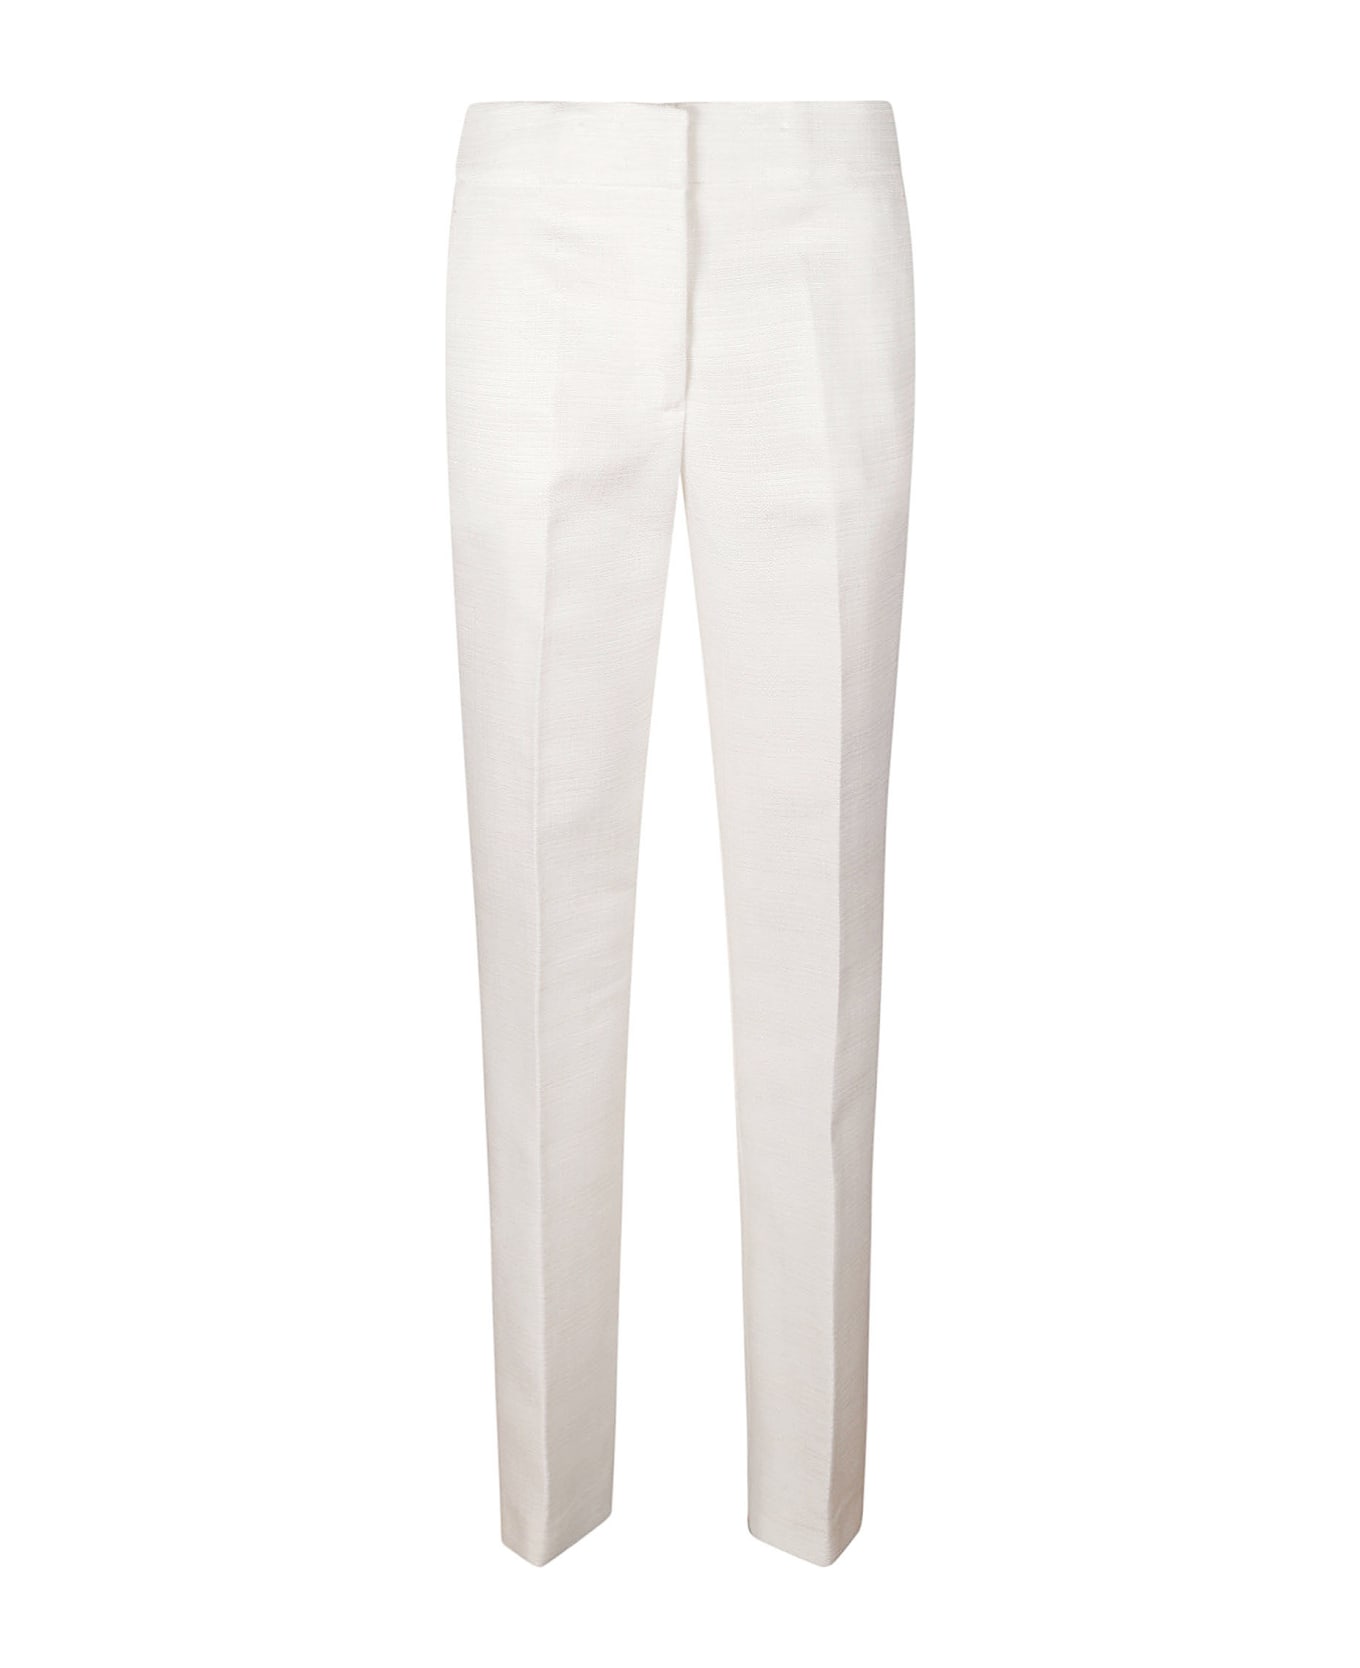 Genny Trousers - White ボトムス